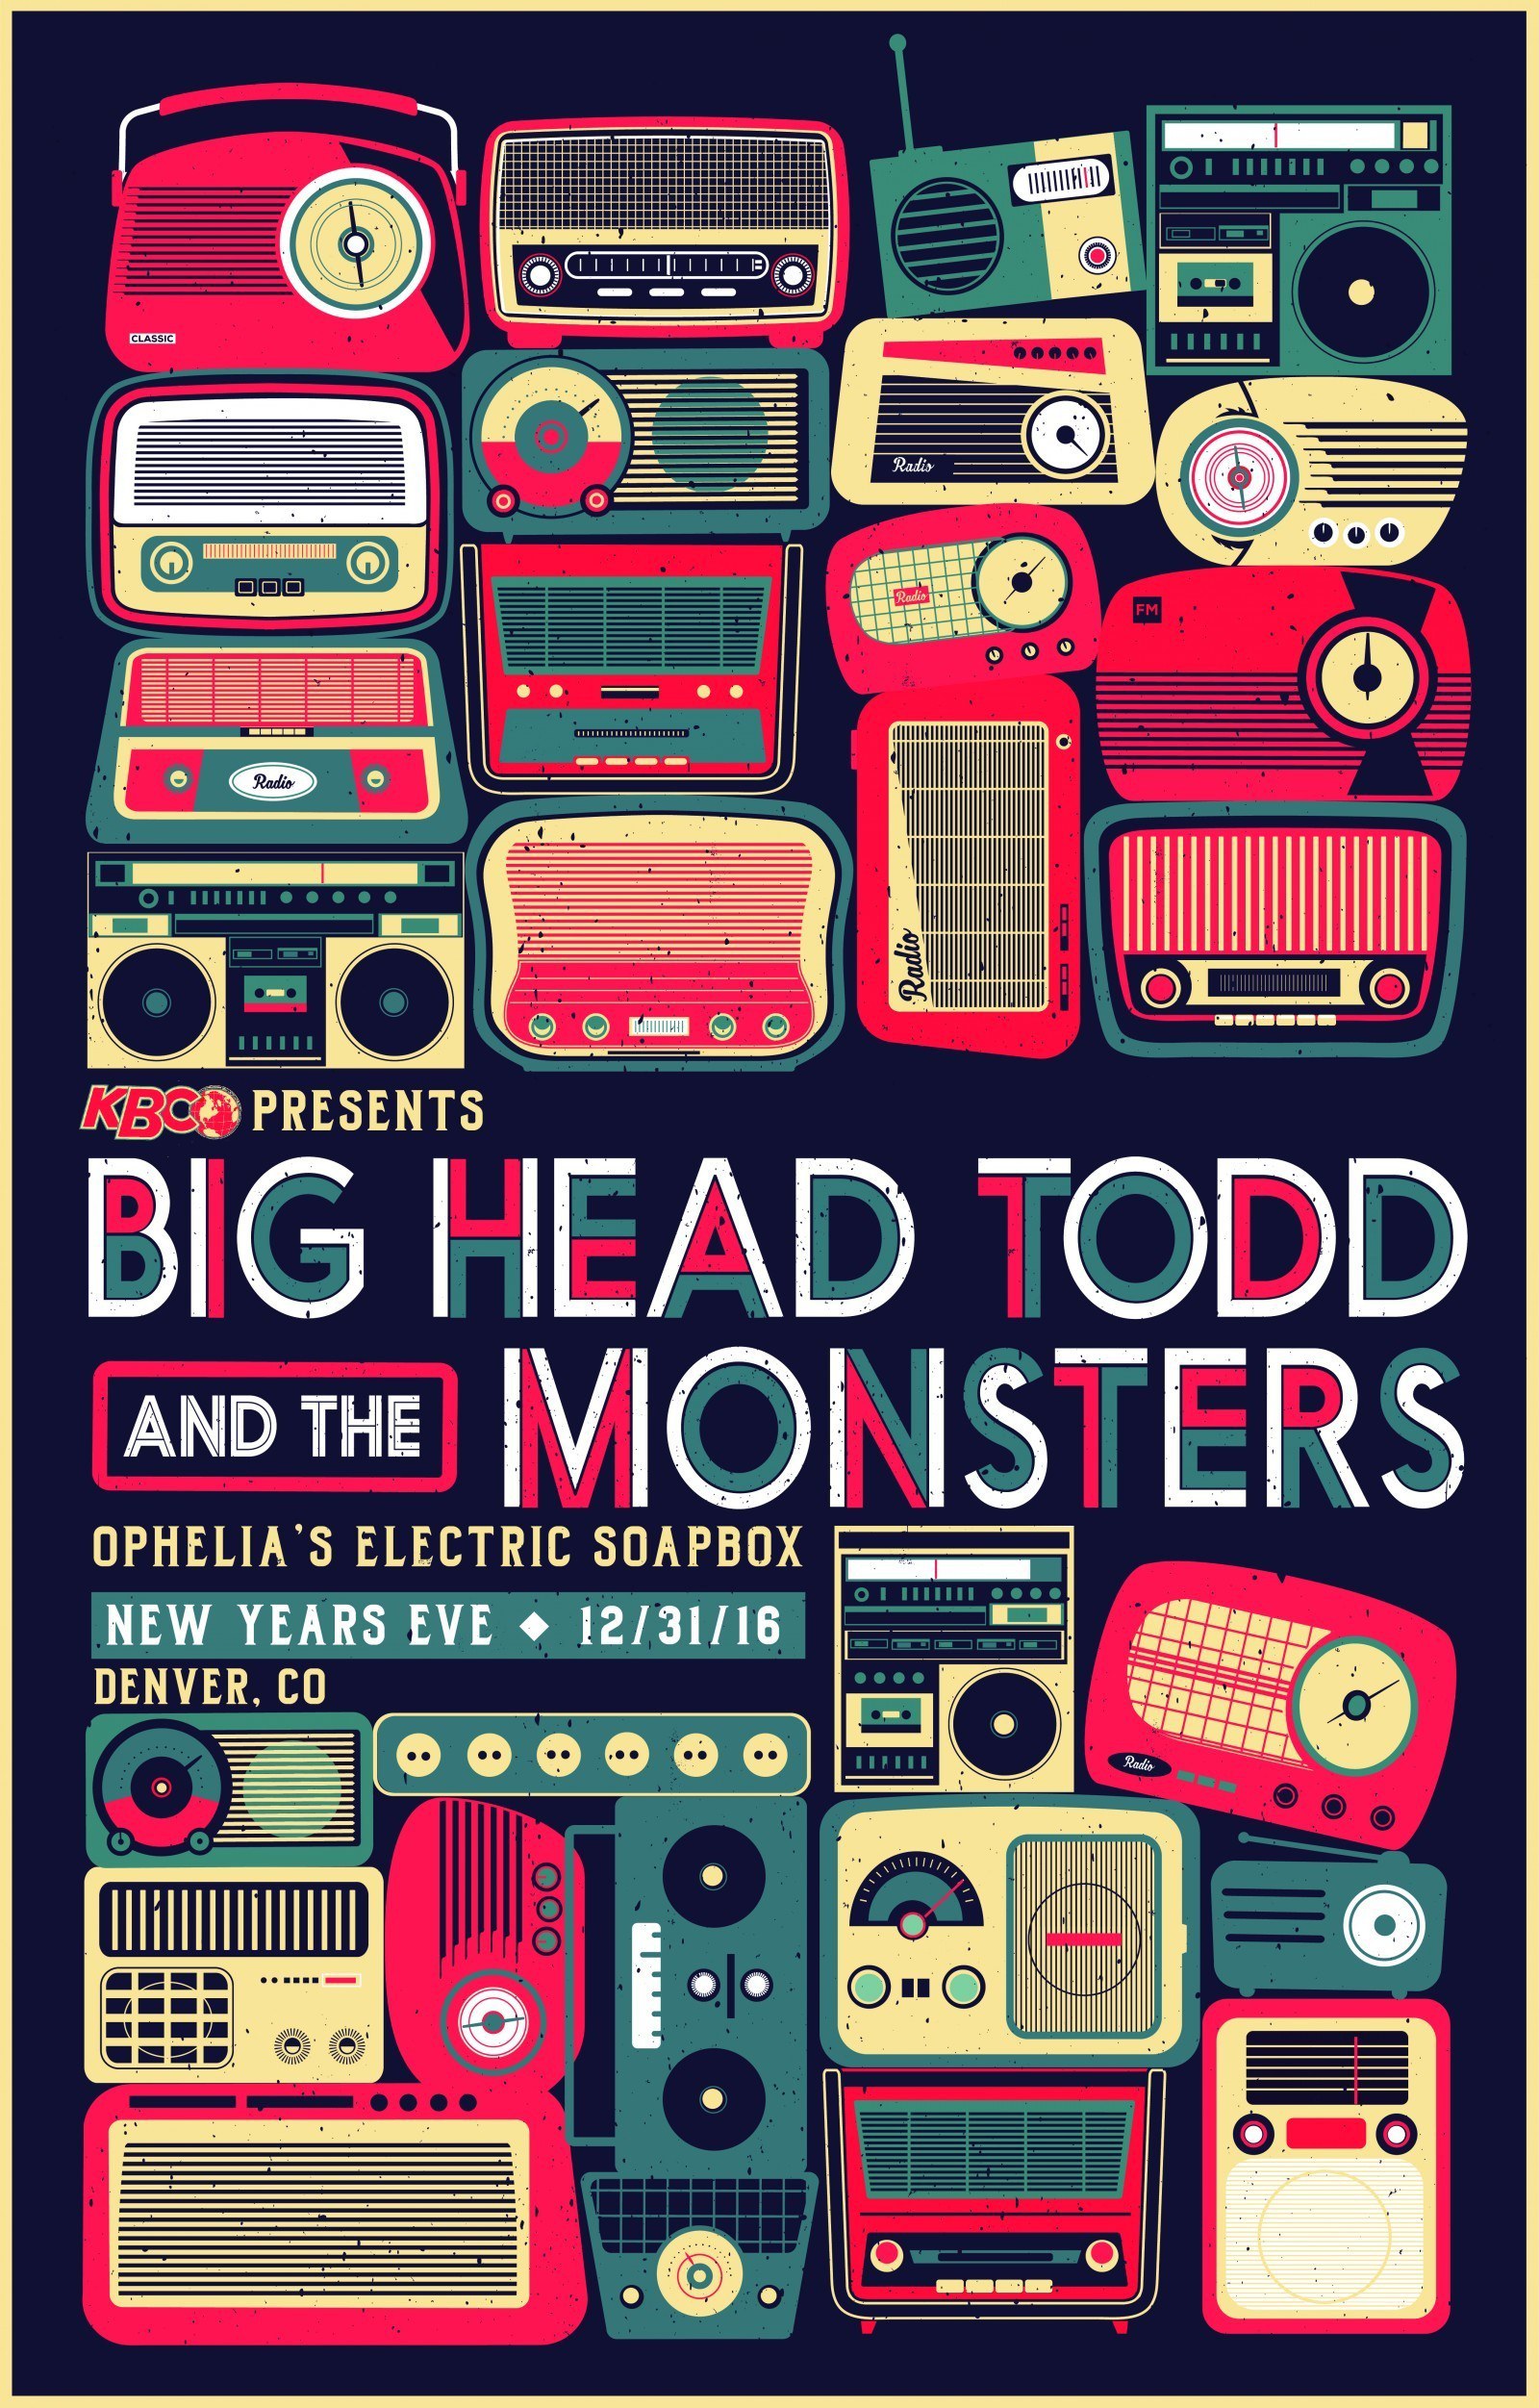 Big Head Todd & The Monsters NYE Fan Discount at Marriott Denver